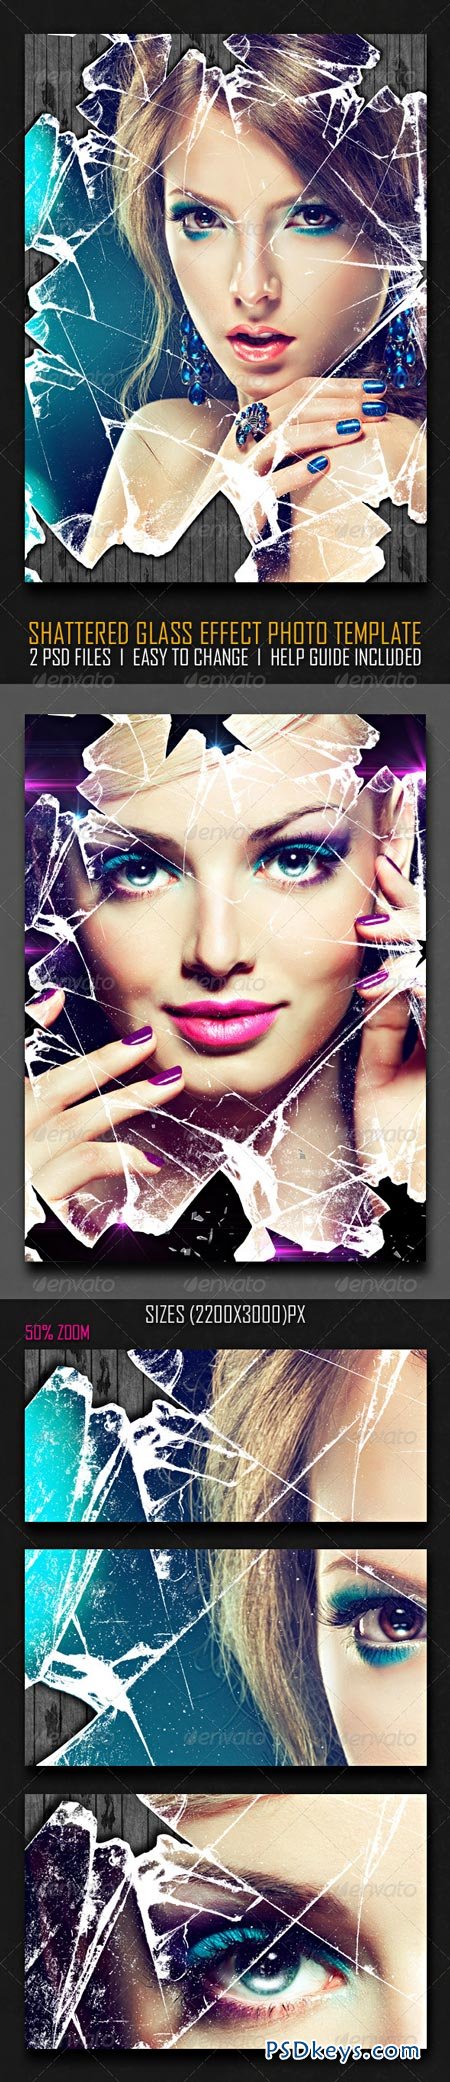 Shattered Glass Effect Photo Template 6521455